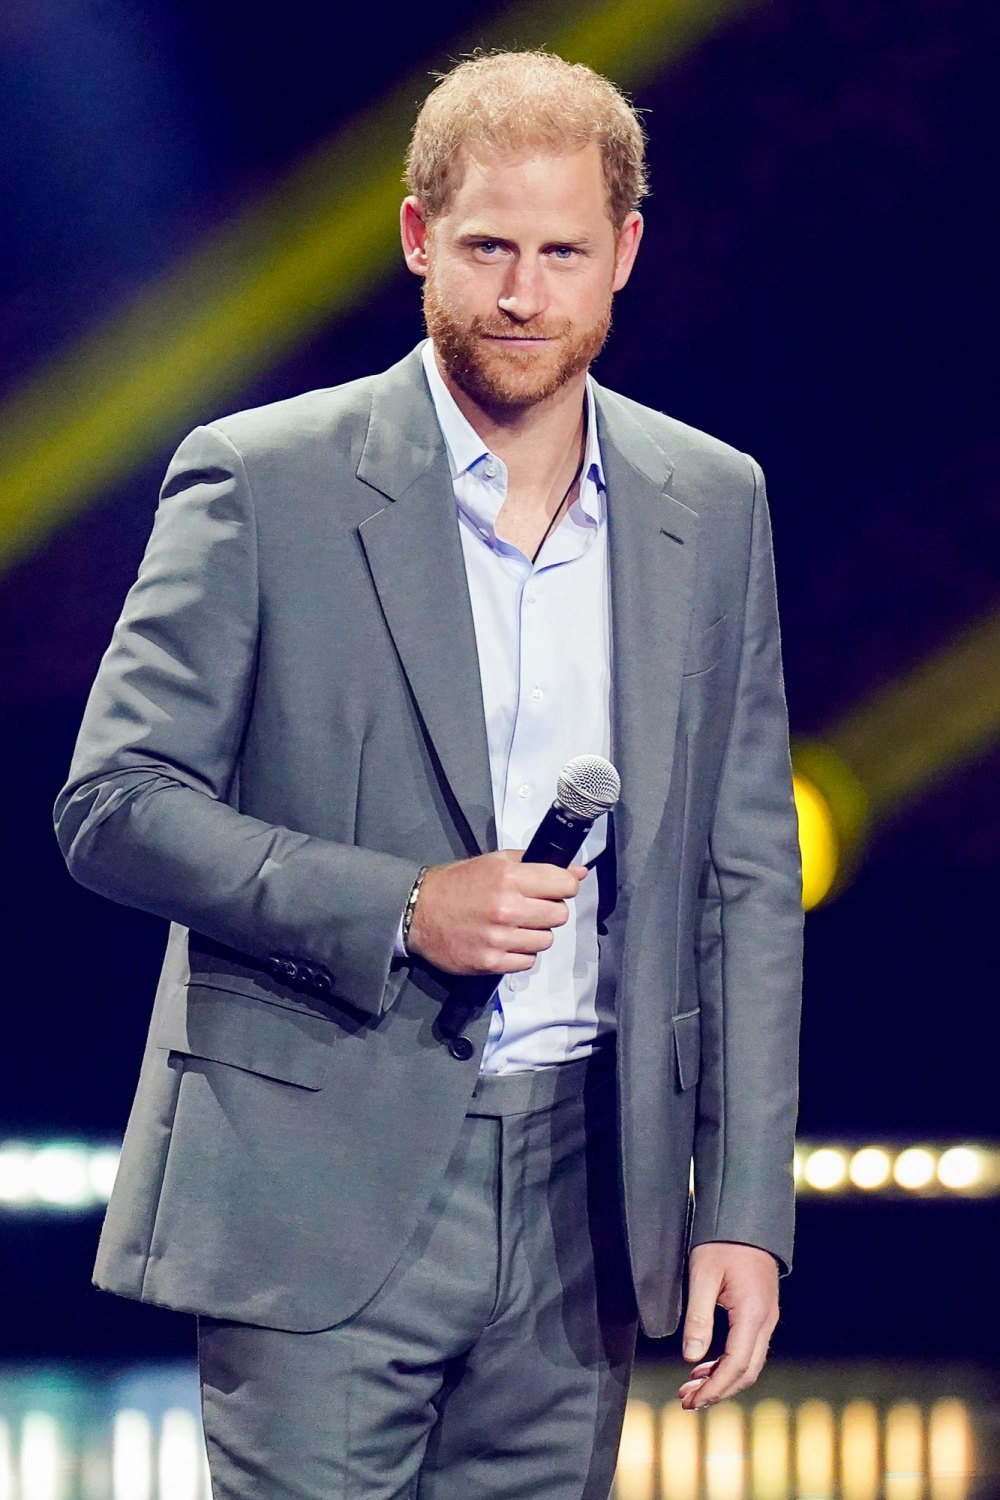 Prince Harry Makes Surprise Virtual Appearance at Annual Event for His Travalyst Nonprofit 795